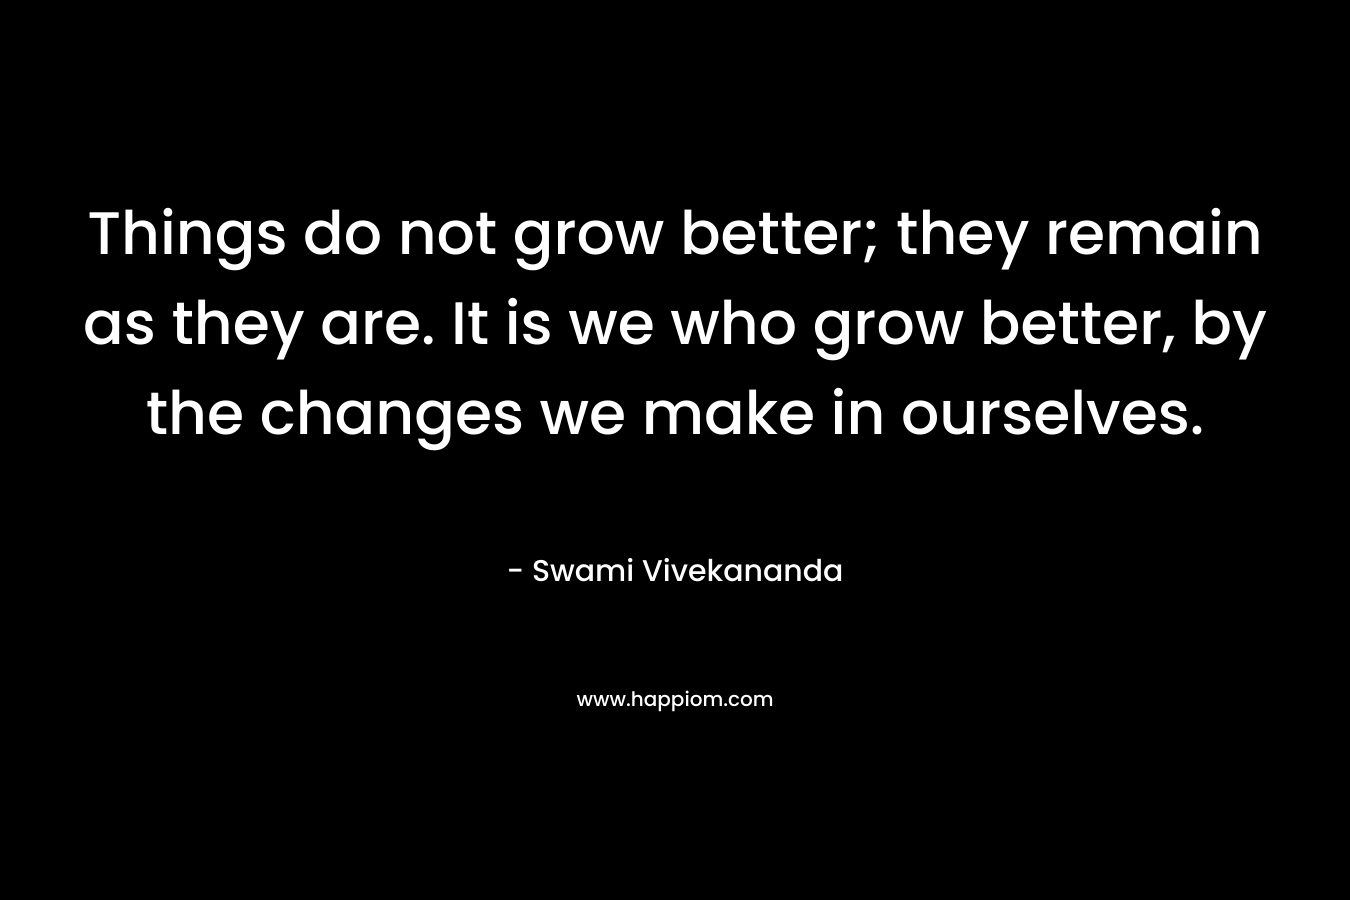 Things do not grow better; they remain as they are. It is we who grow better, by the changes we make in ourselves.